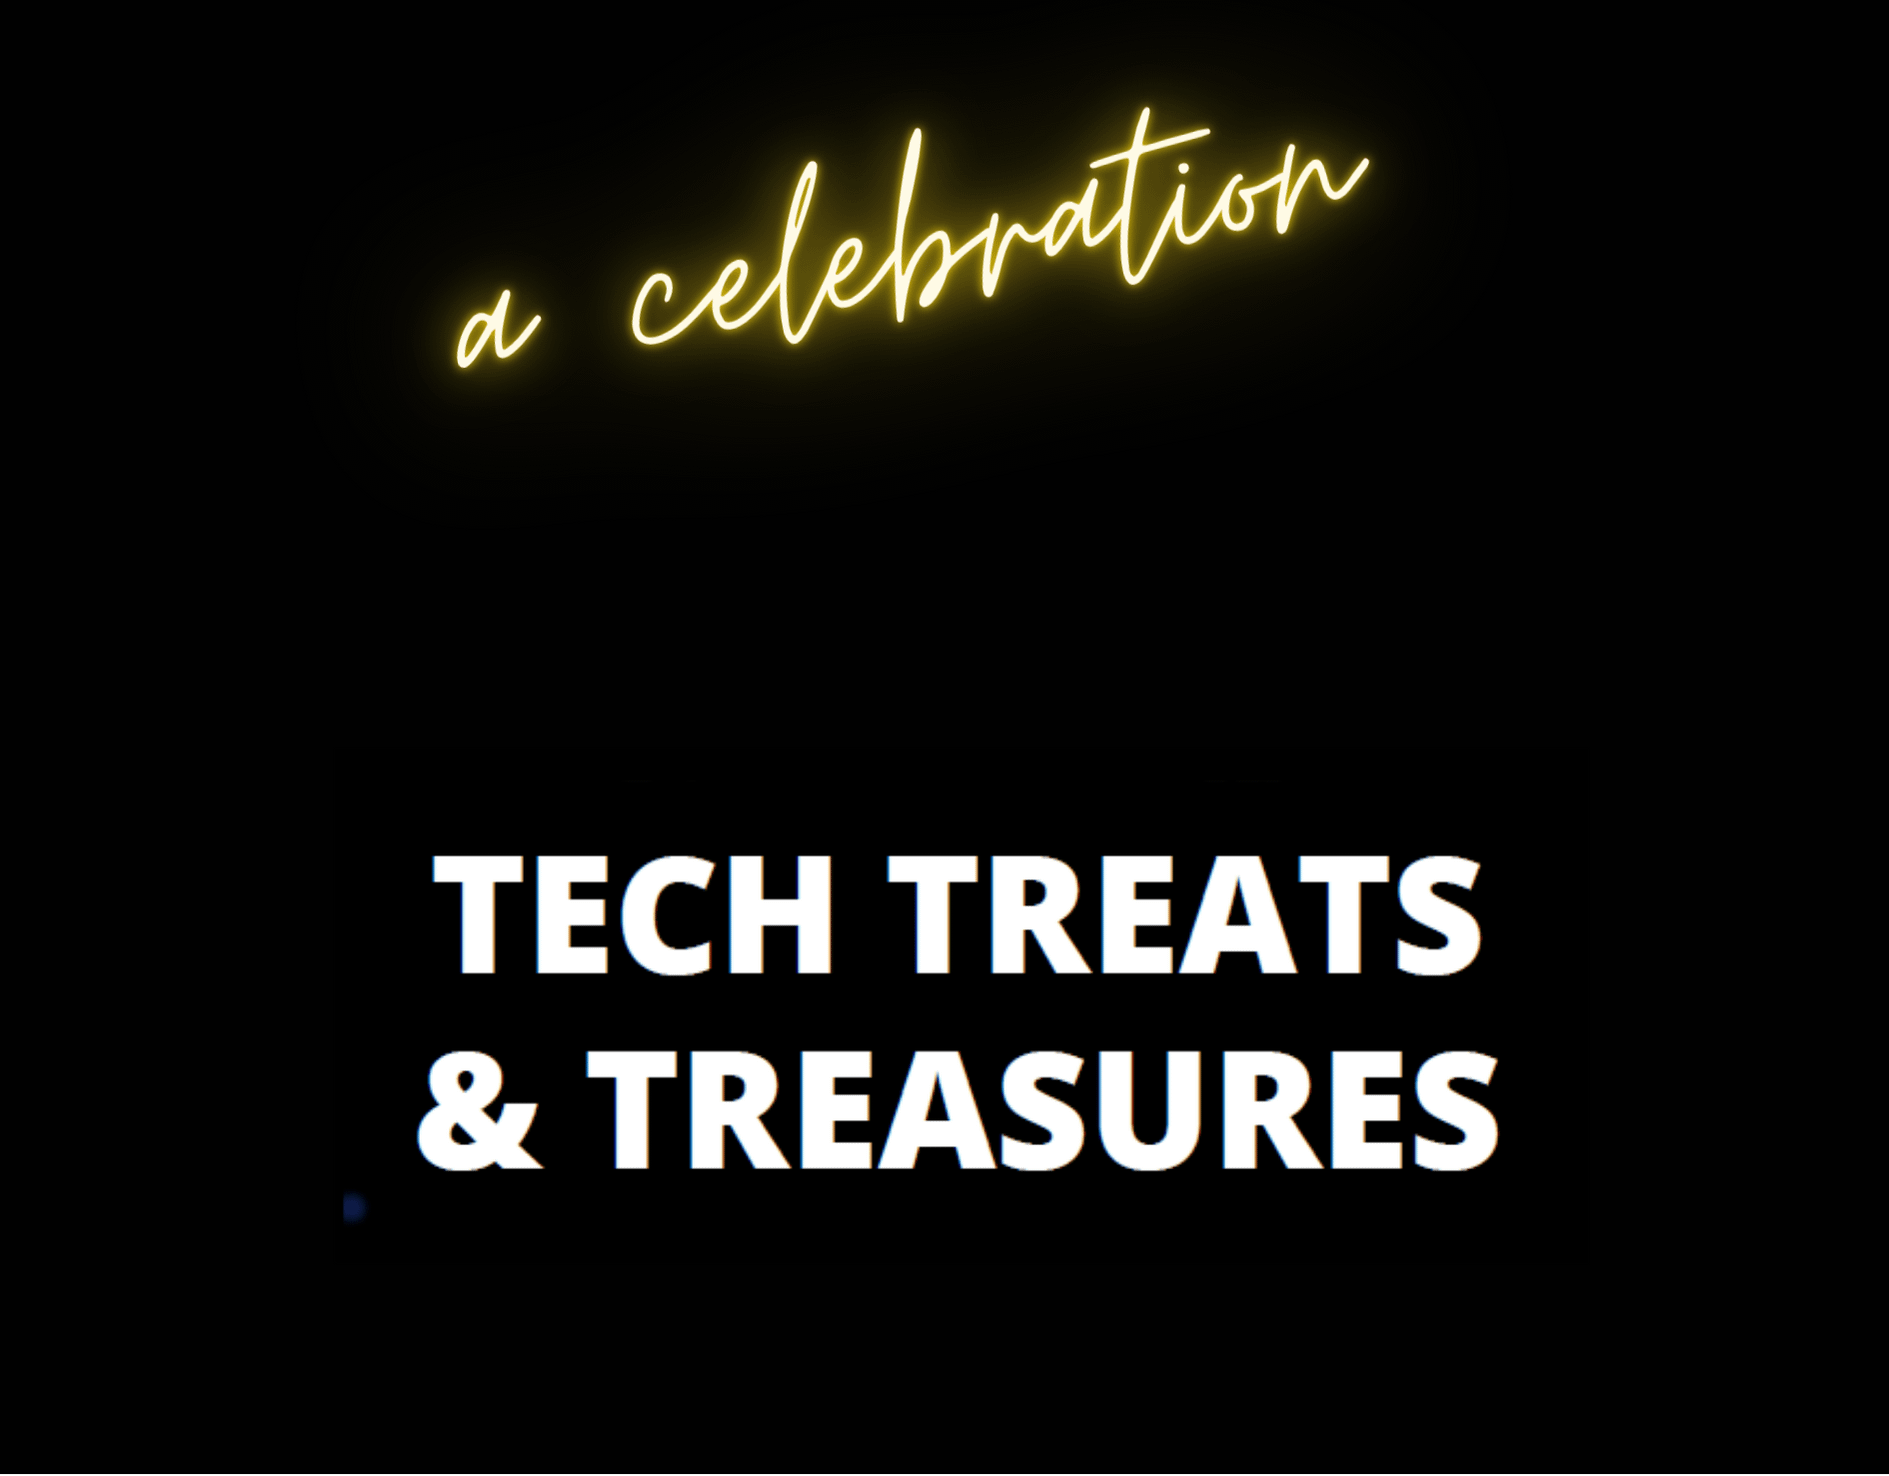 Tech Treats and Treasures podcast, a celebration of a book full of technology tales and golden nuggets of advice from over 80 remarkable leaders